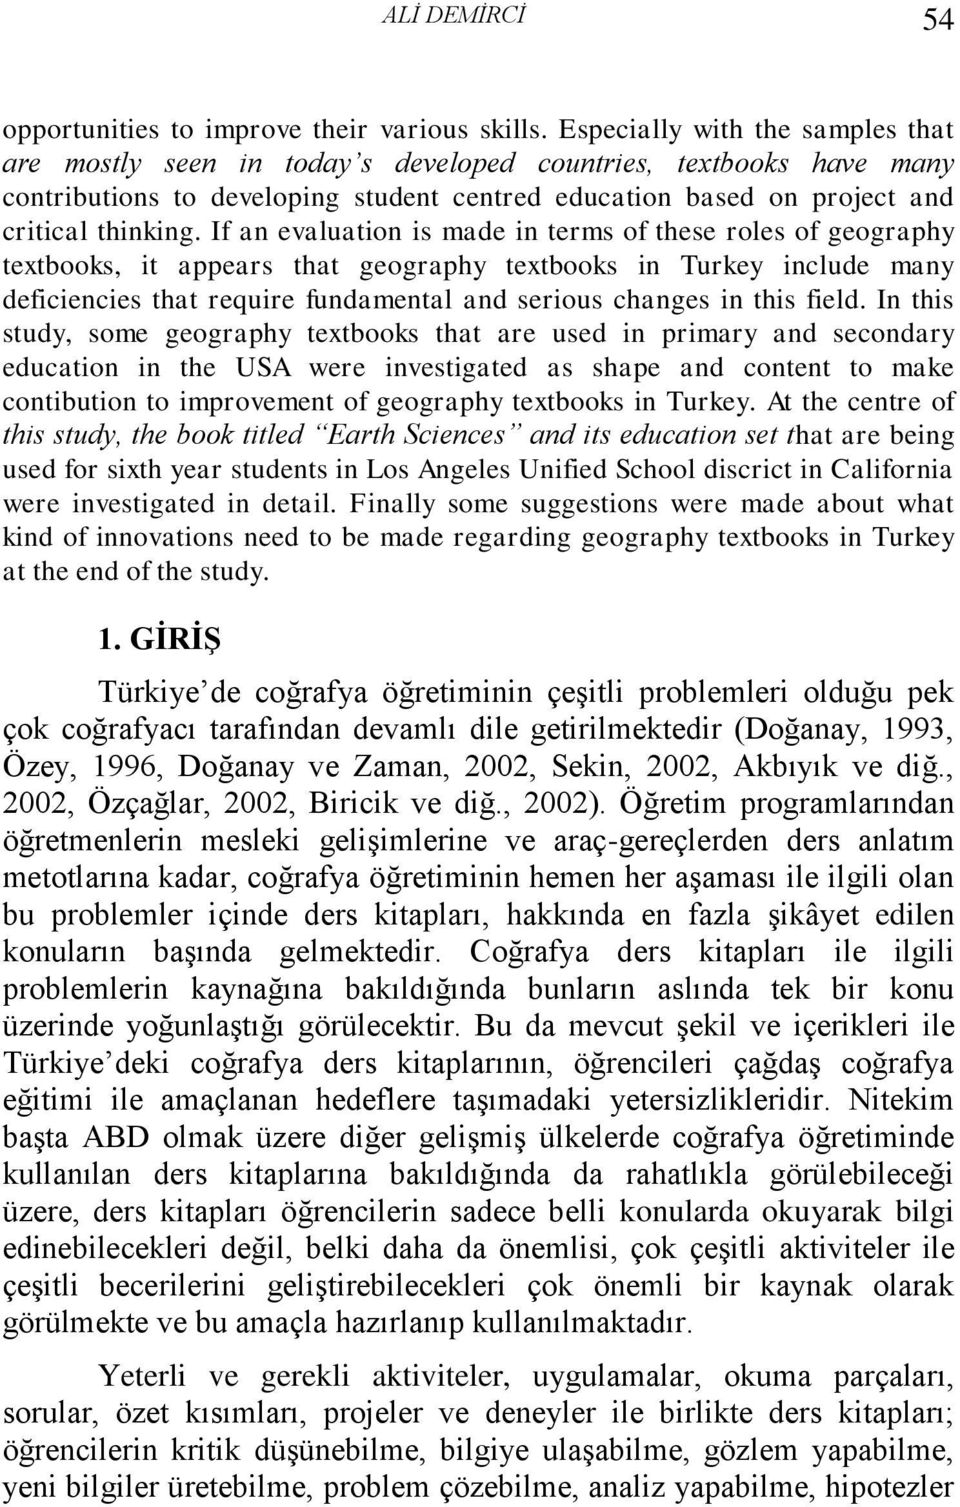 If an evaluation is made in terms of these roles of geography textbooks, it appears that geography textbooks in Turkey include many deficiencies that require fundamental and serious changes in this